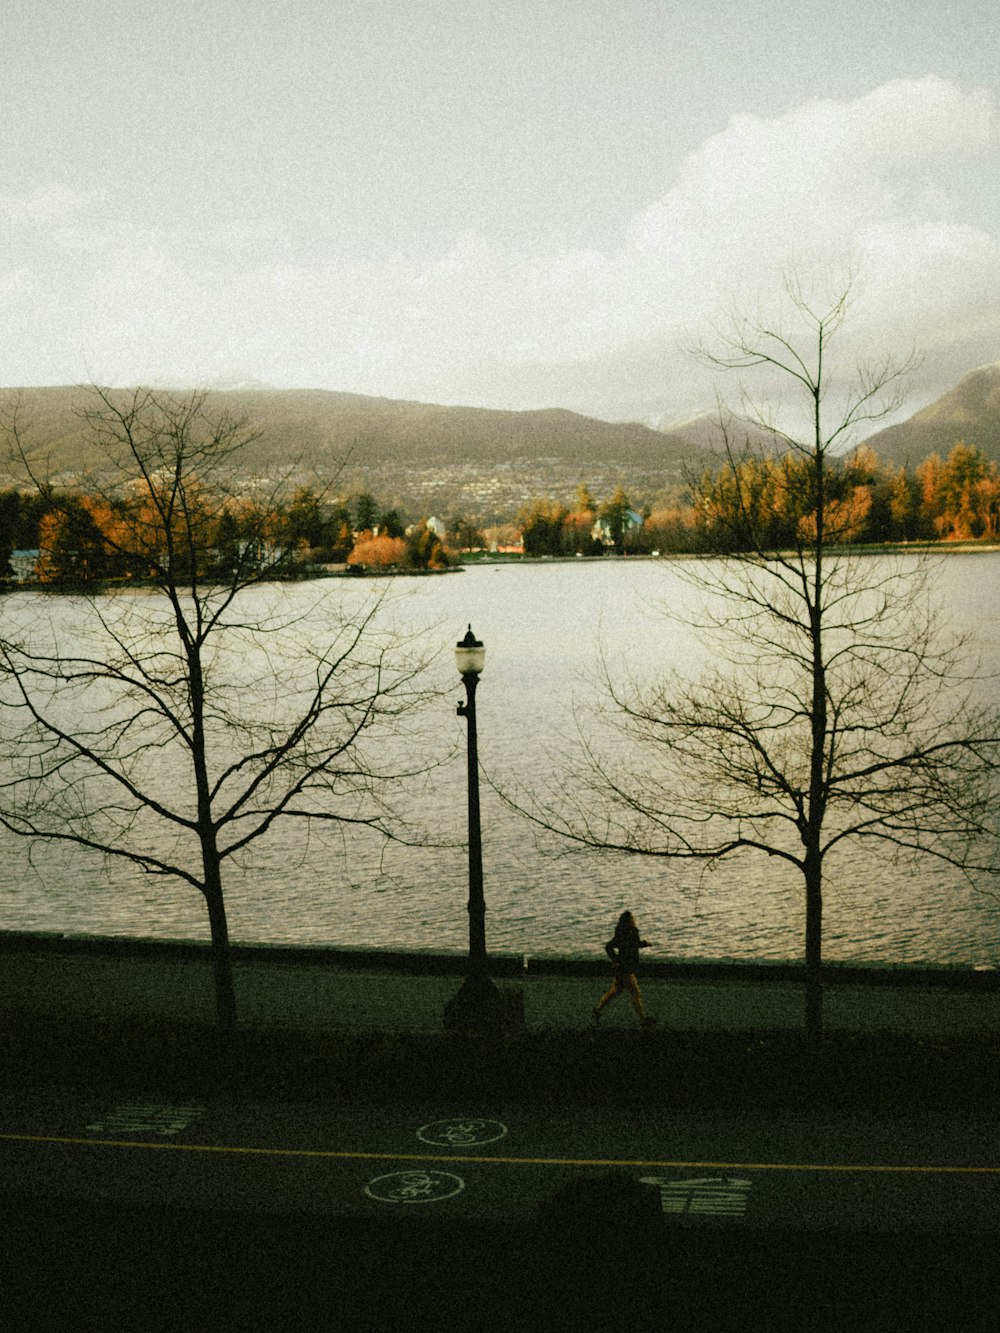 a person walking down a sidewalk next to a body of water